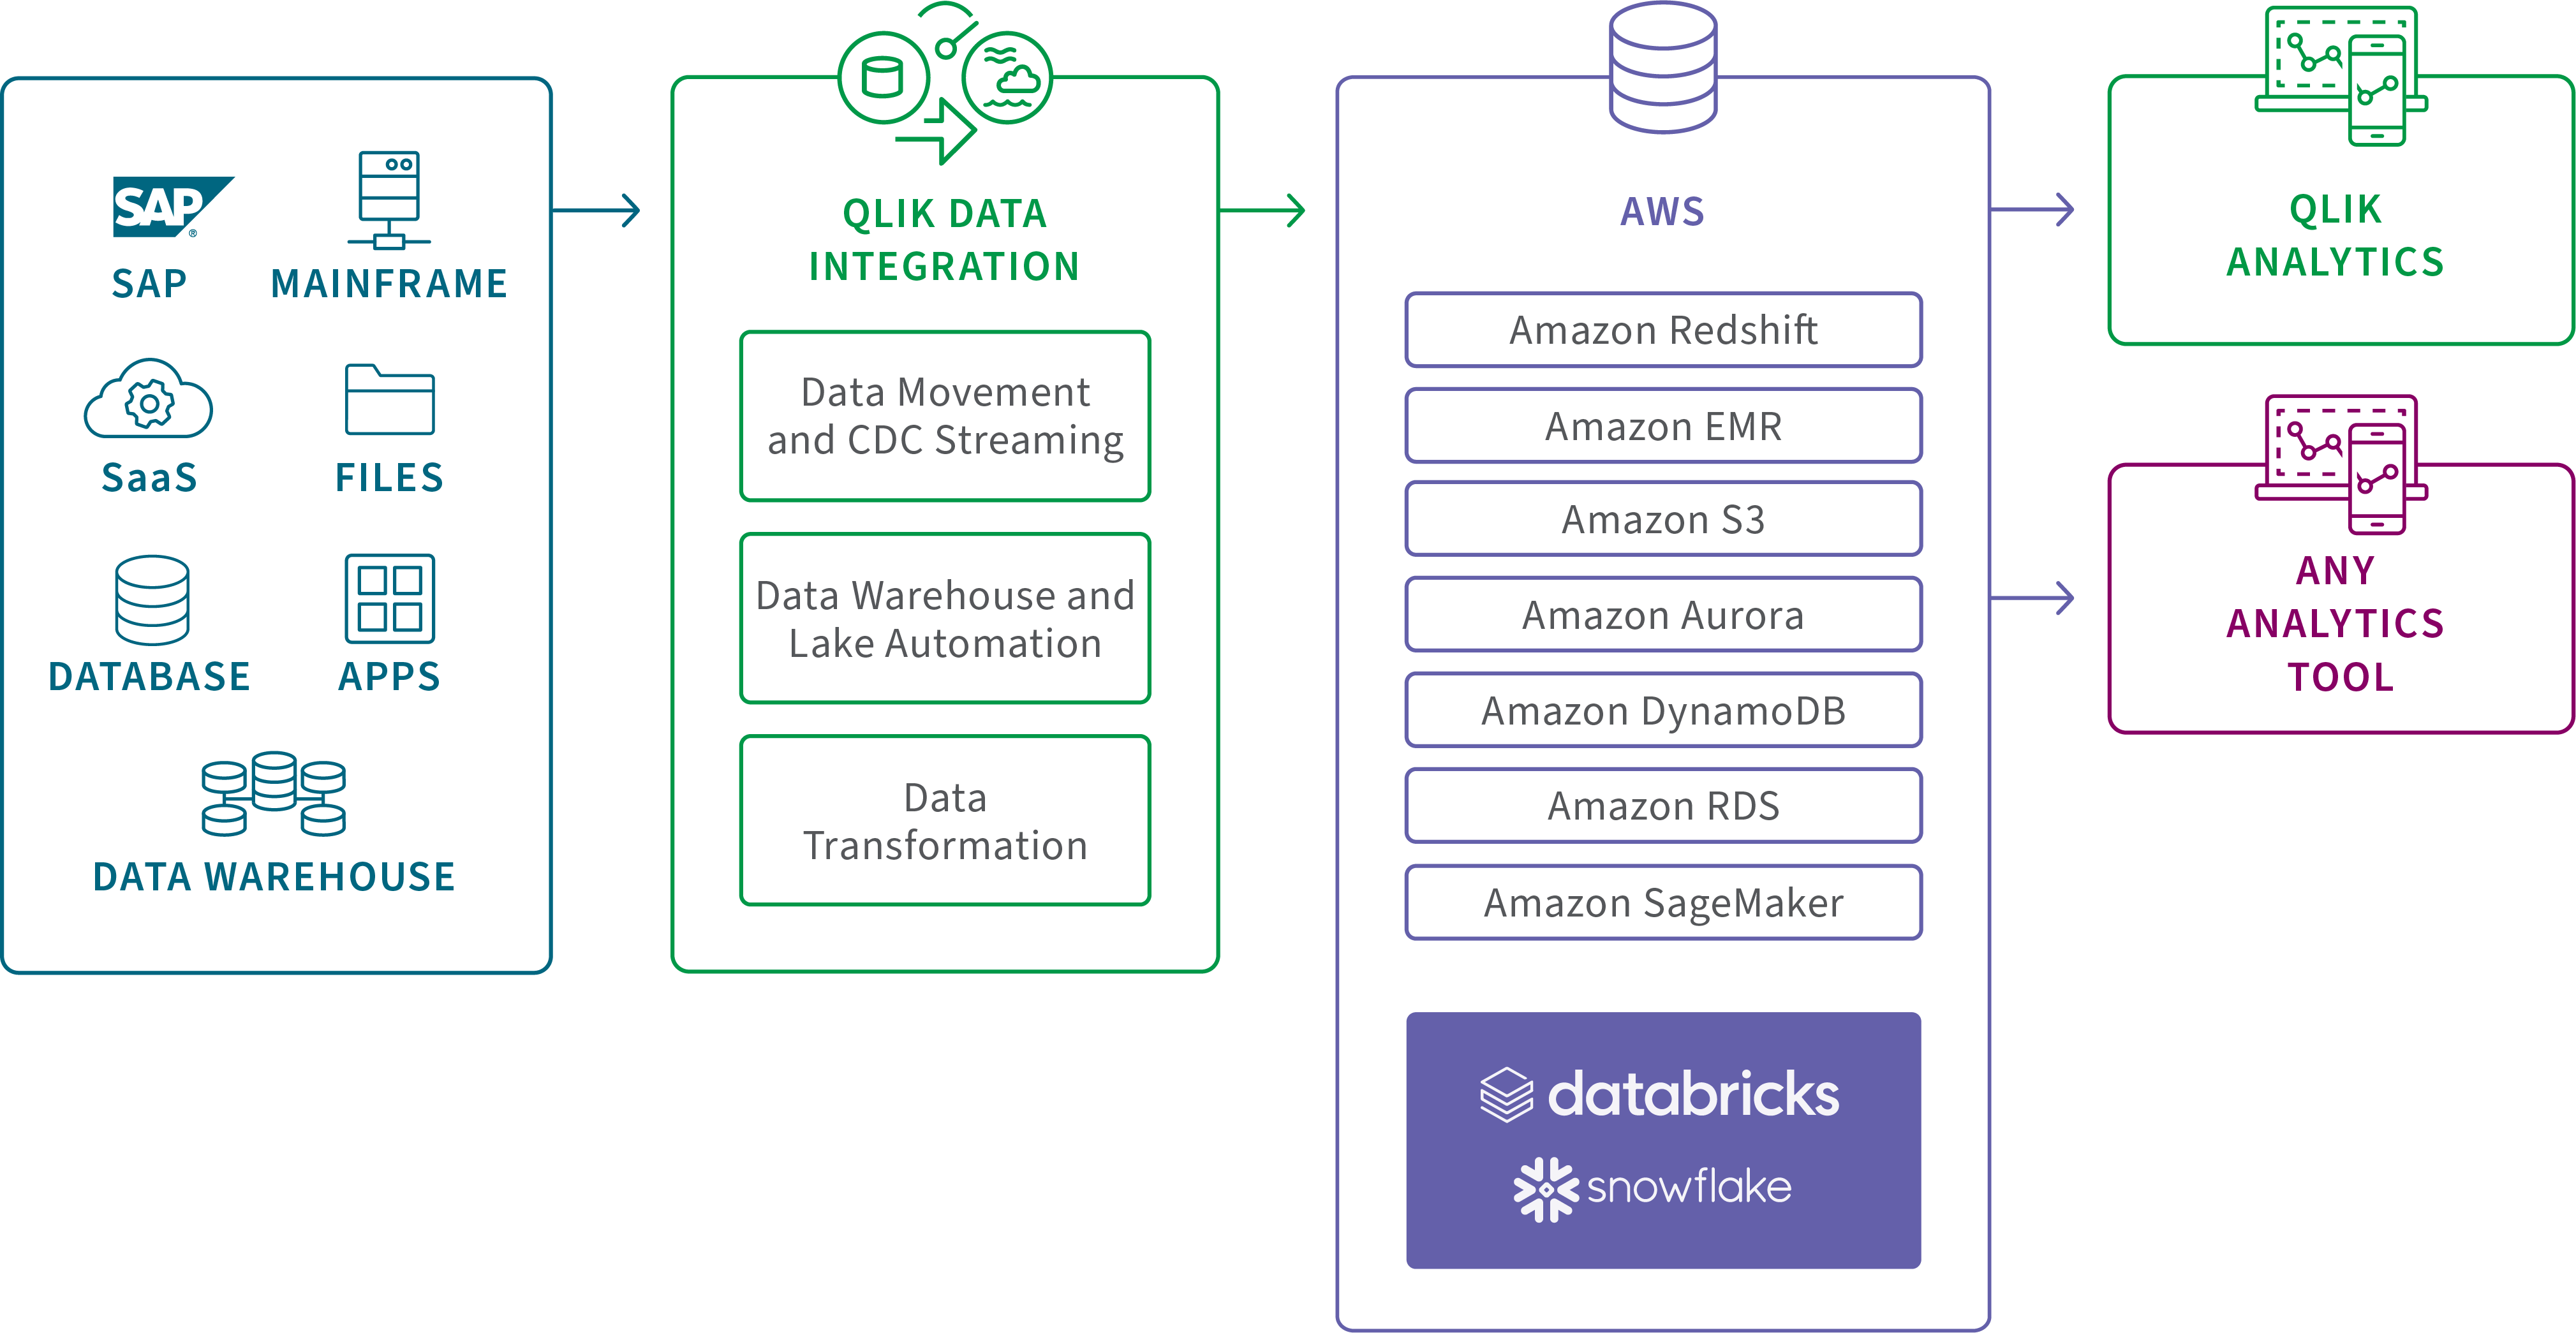 Diagram showing how Qlik Data Integration passes data to AWS for use in Analytics Tools